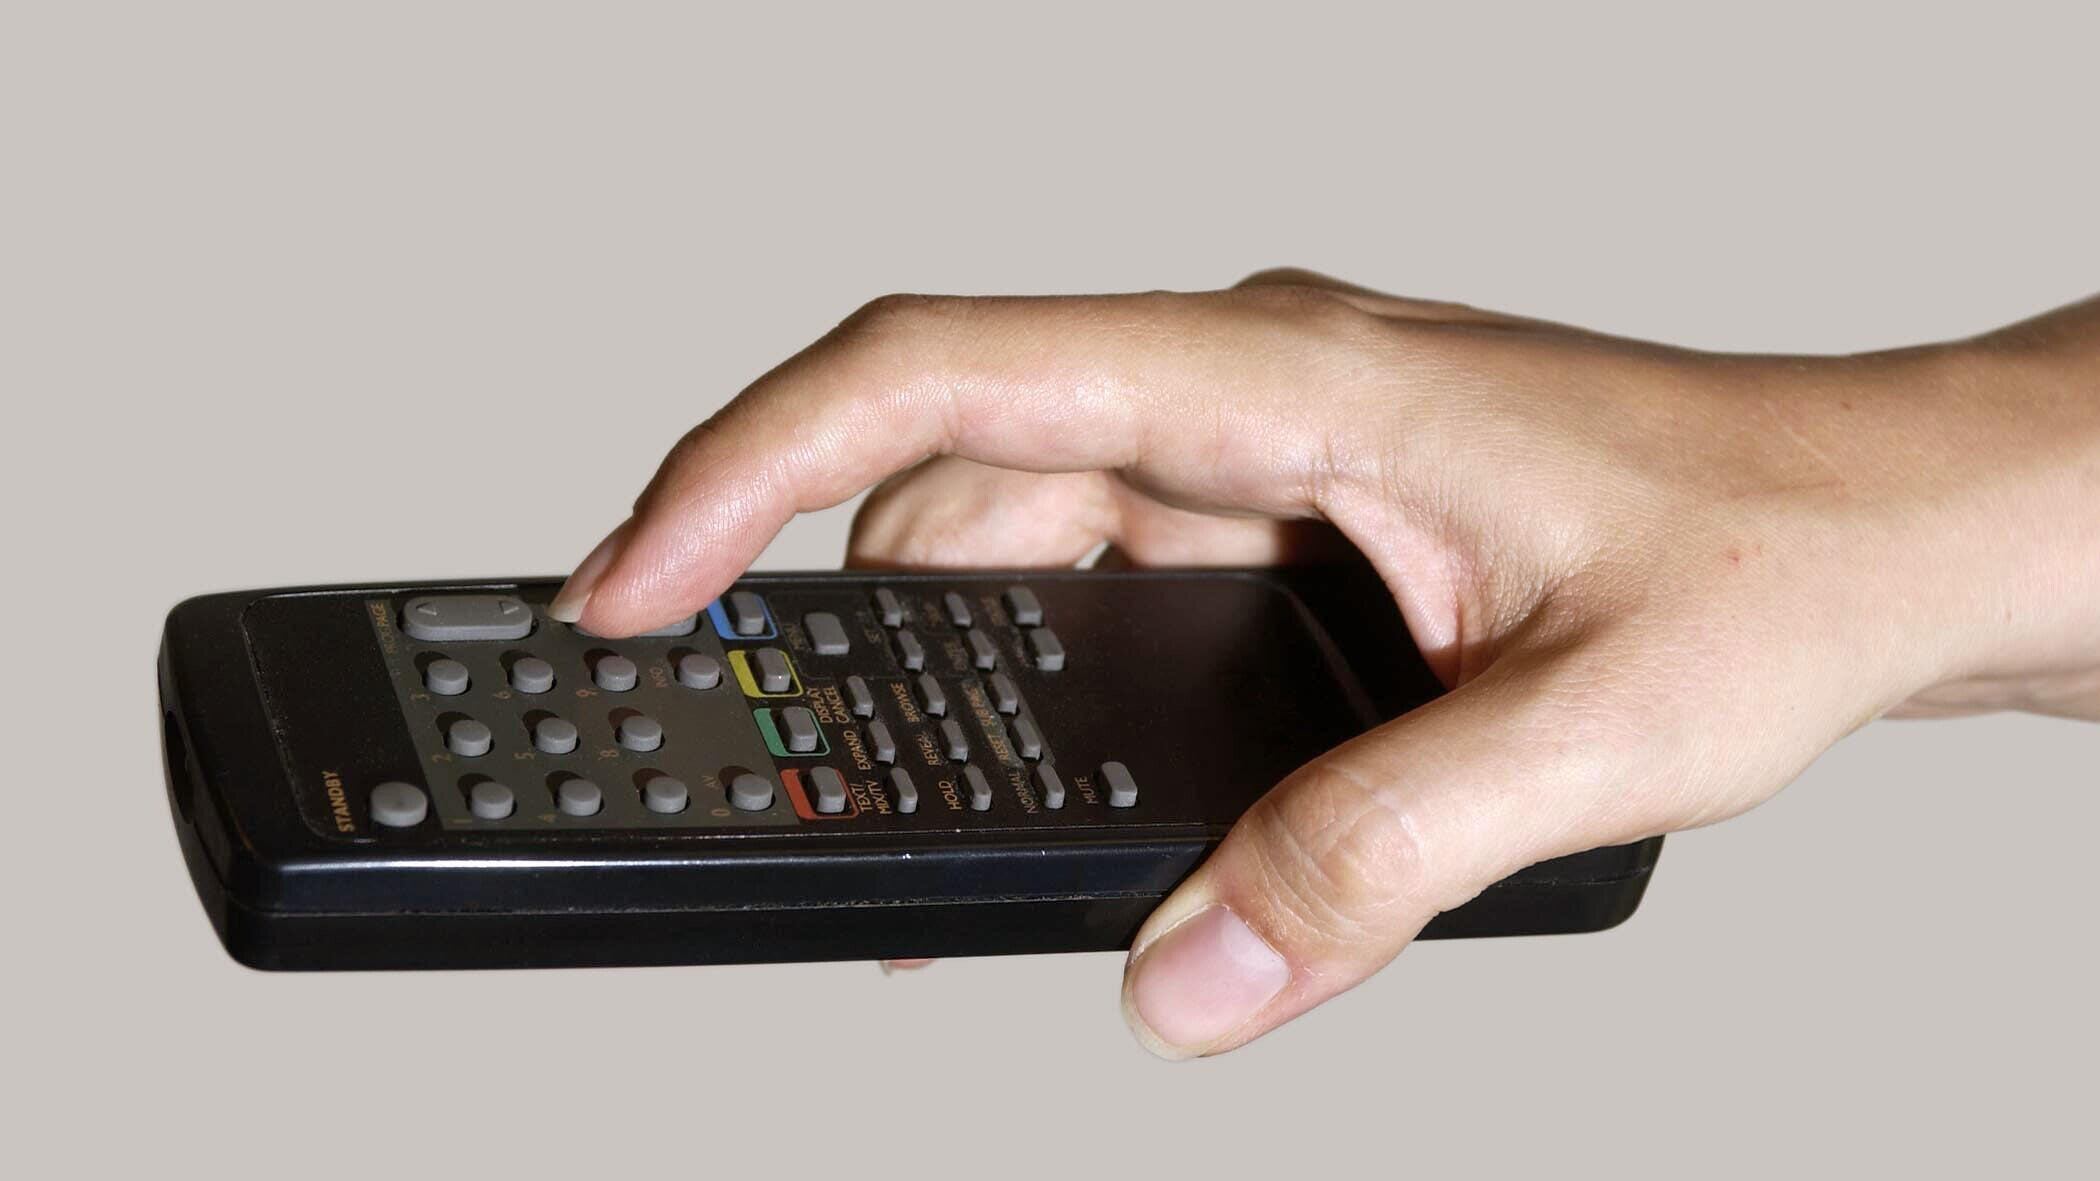 A hand holding a television remote control (Myung Jung Kim/PA)